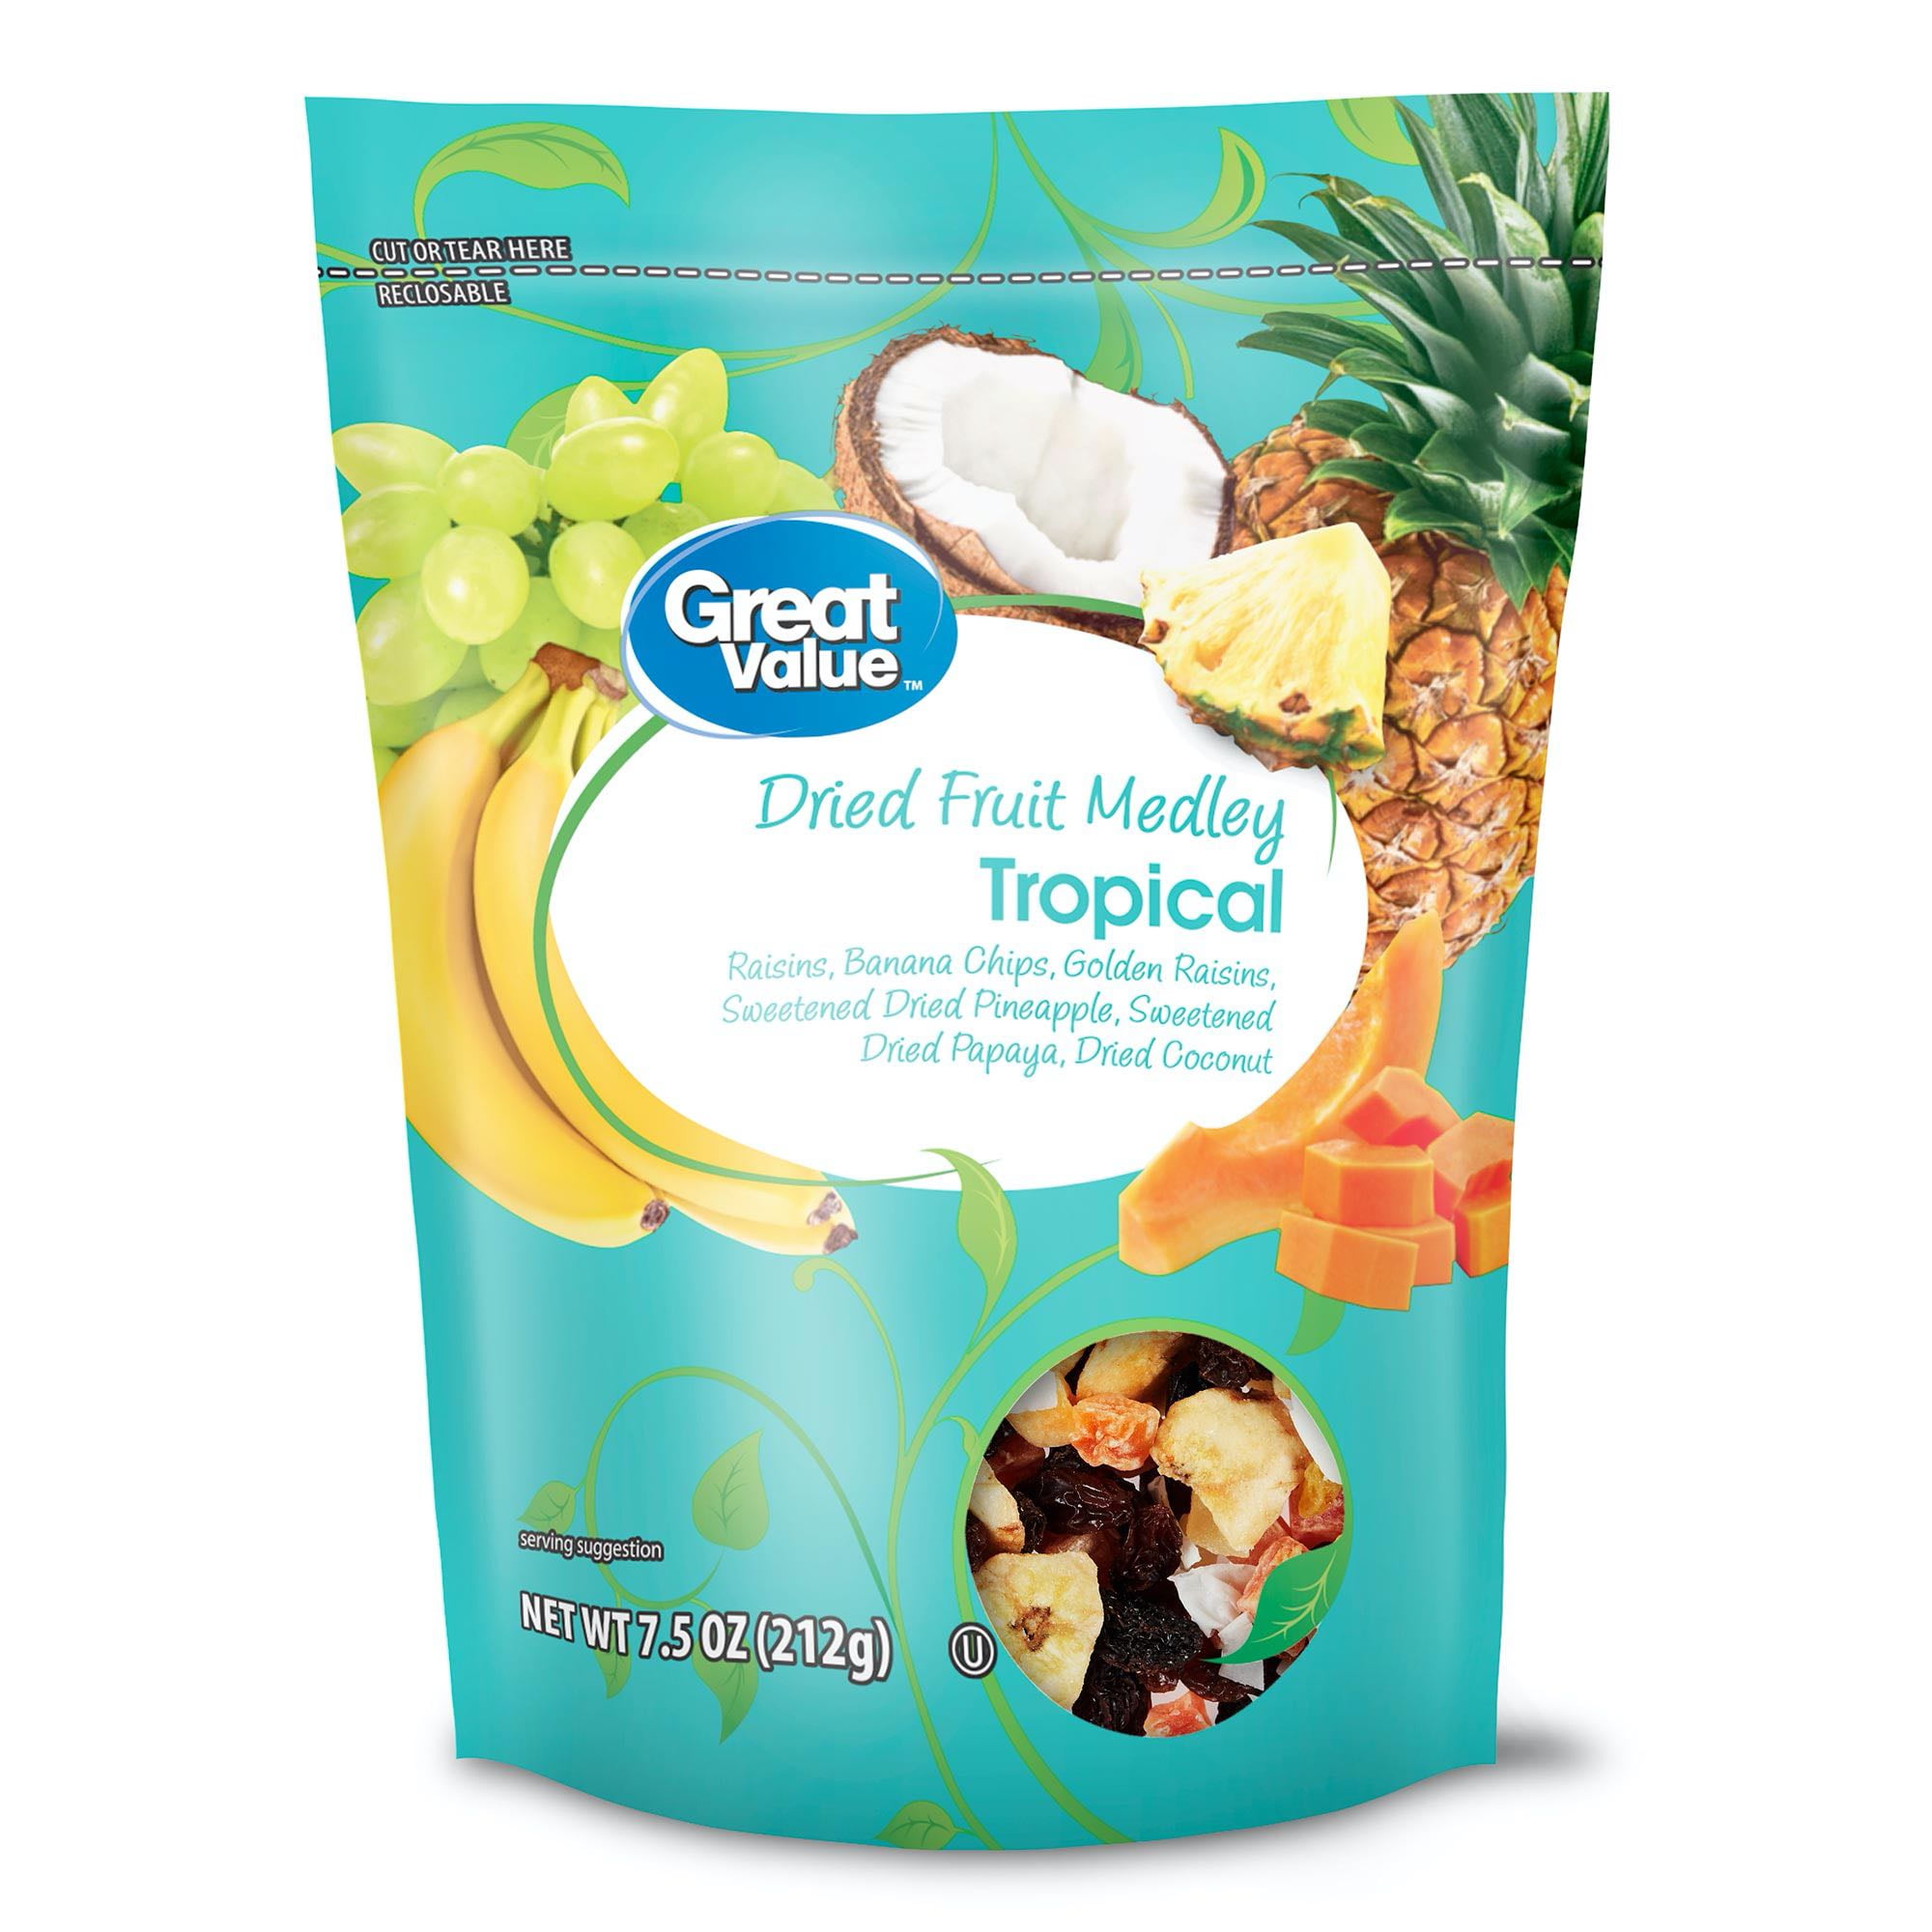 Great Value Dried Fruit Medley, Tropical, 7.5 oz